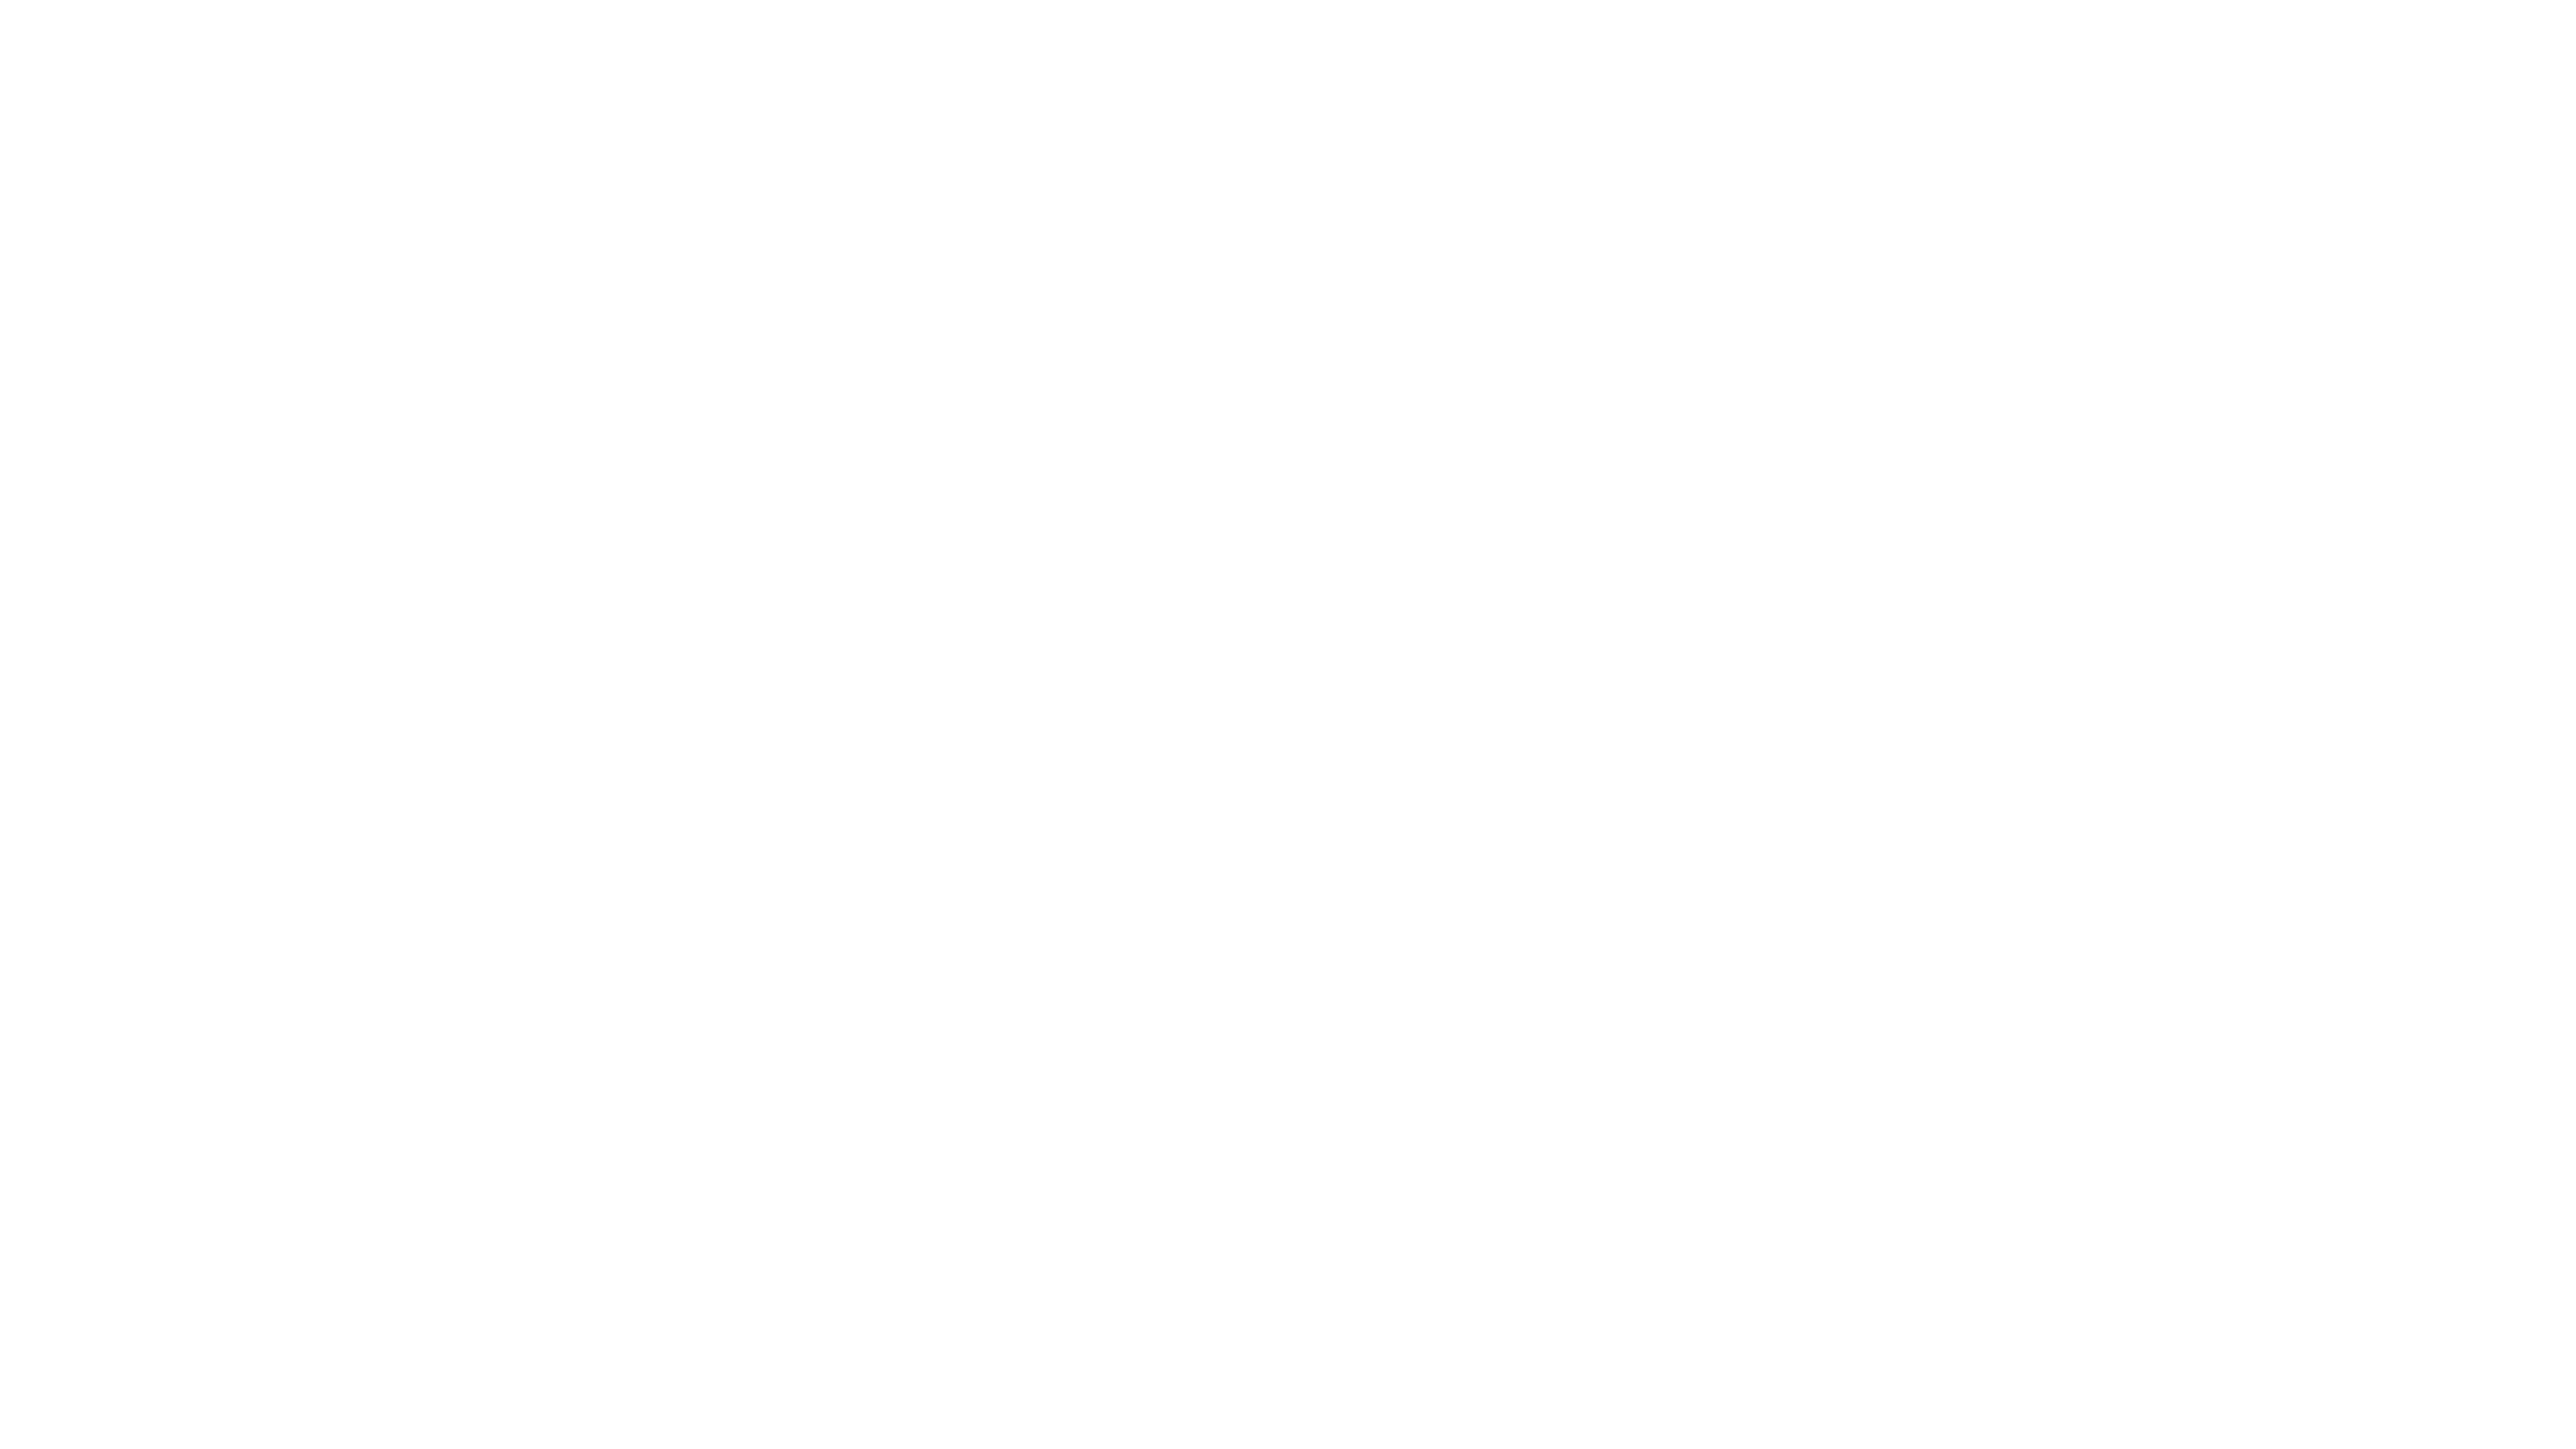 LEVELUP 